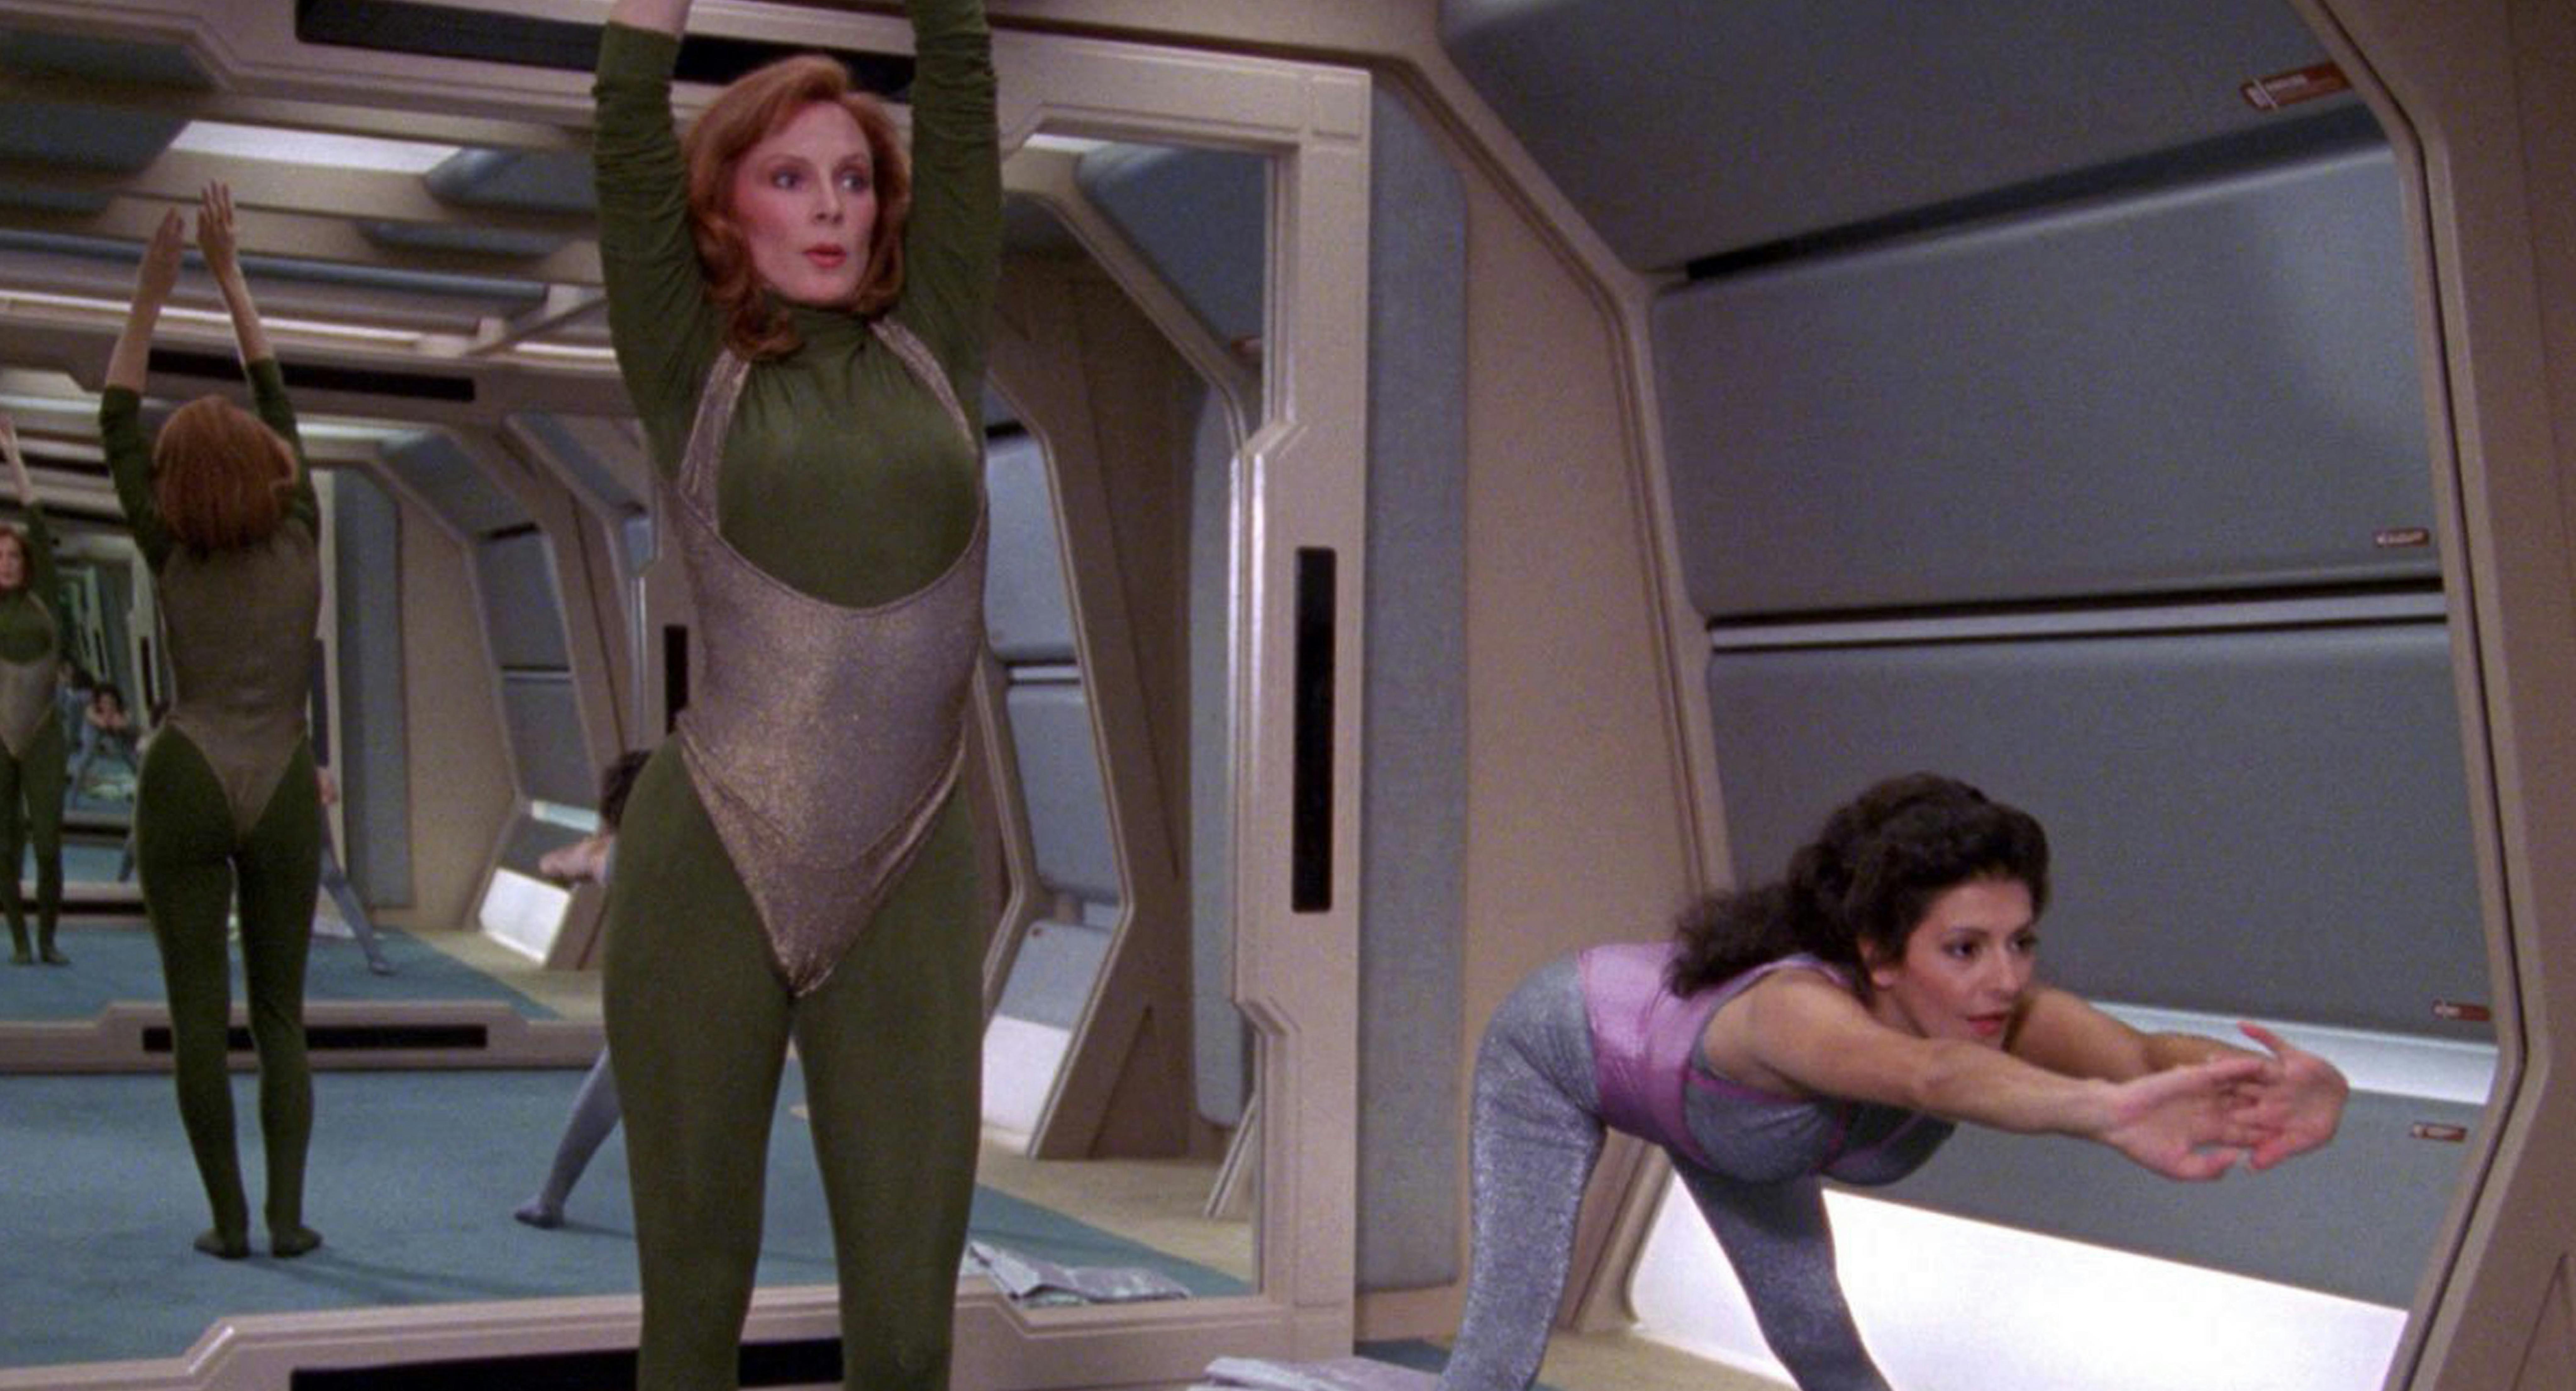 Dr. Crusher and Deanna Troi stretching in aerobics class on The Next Generation